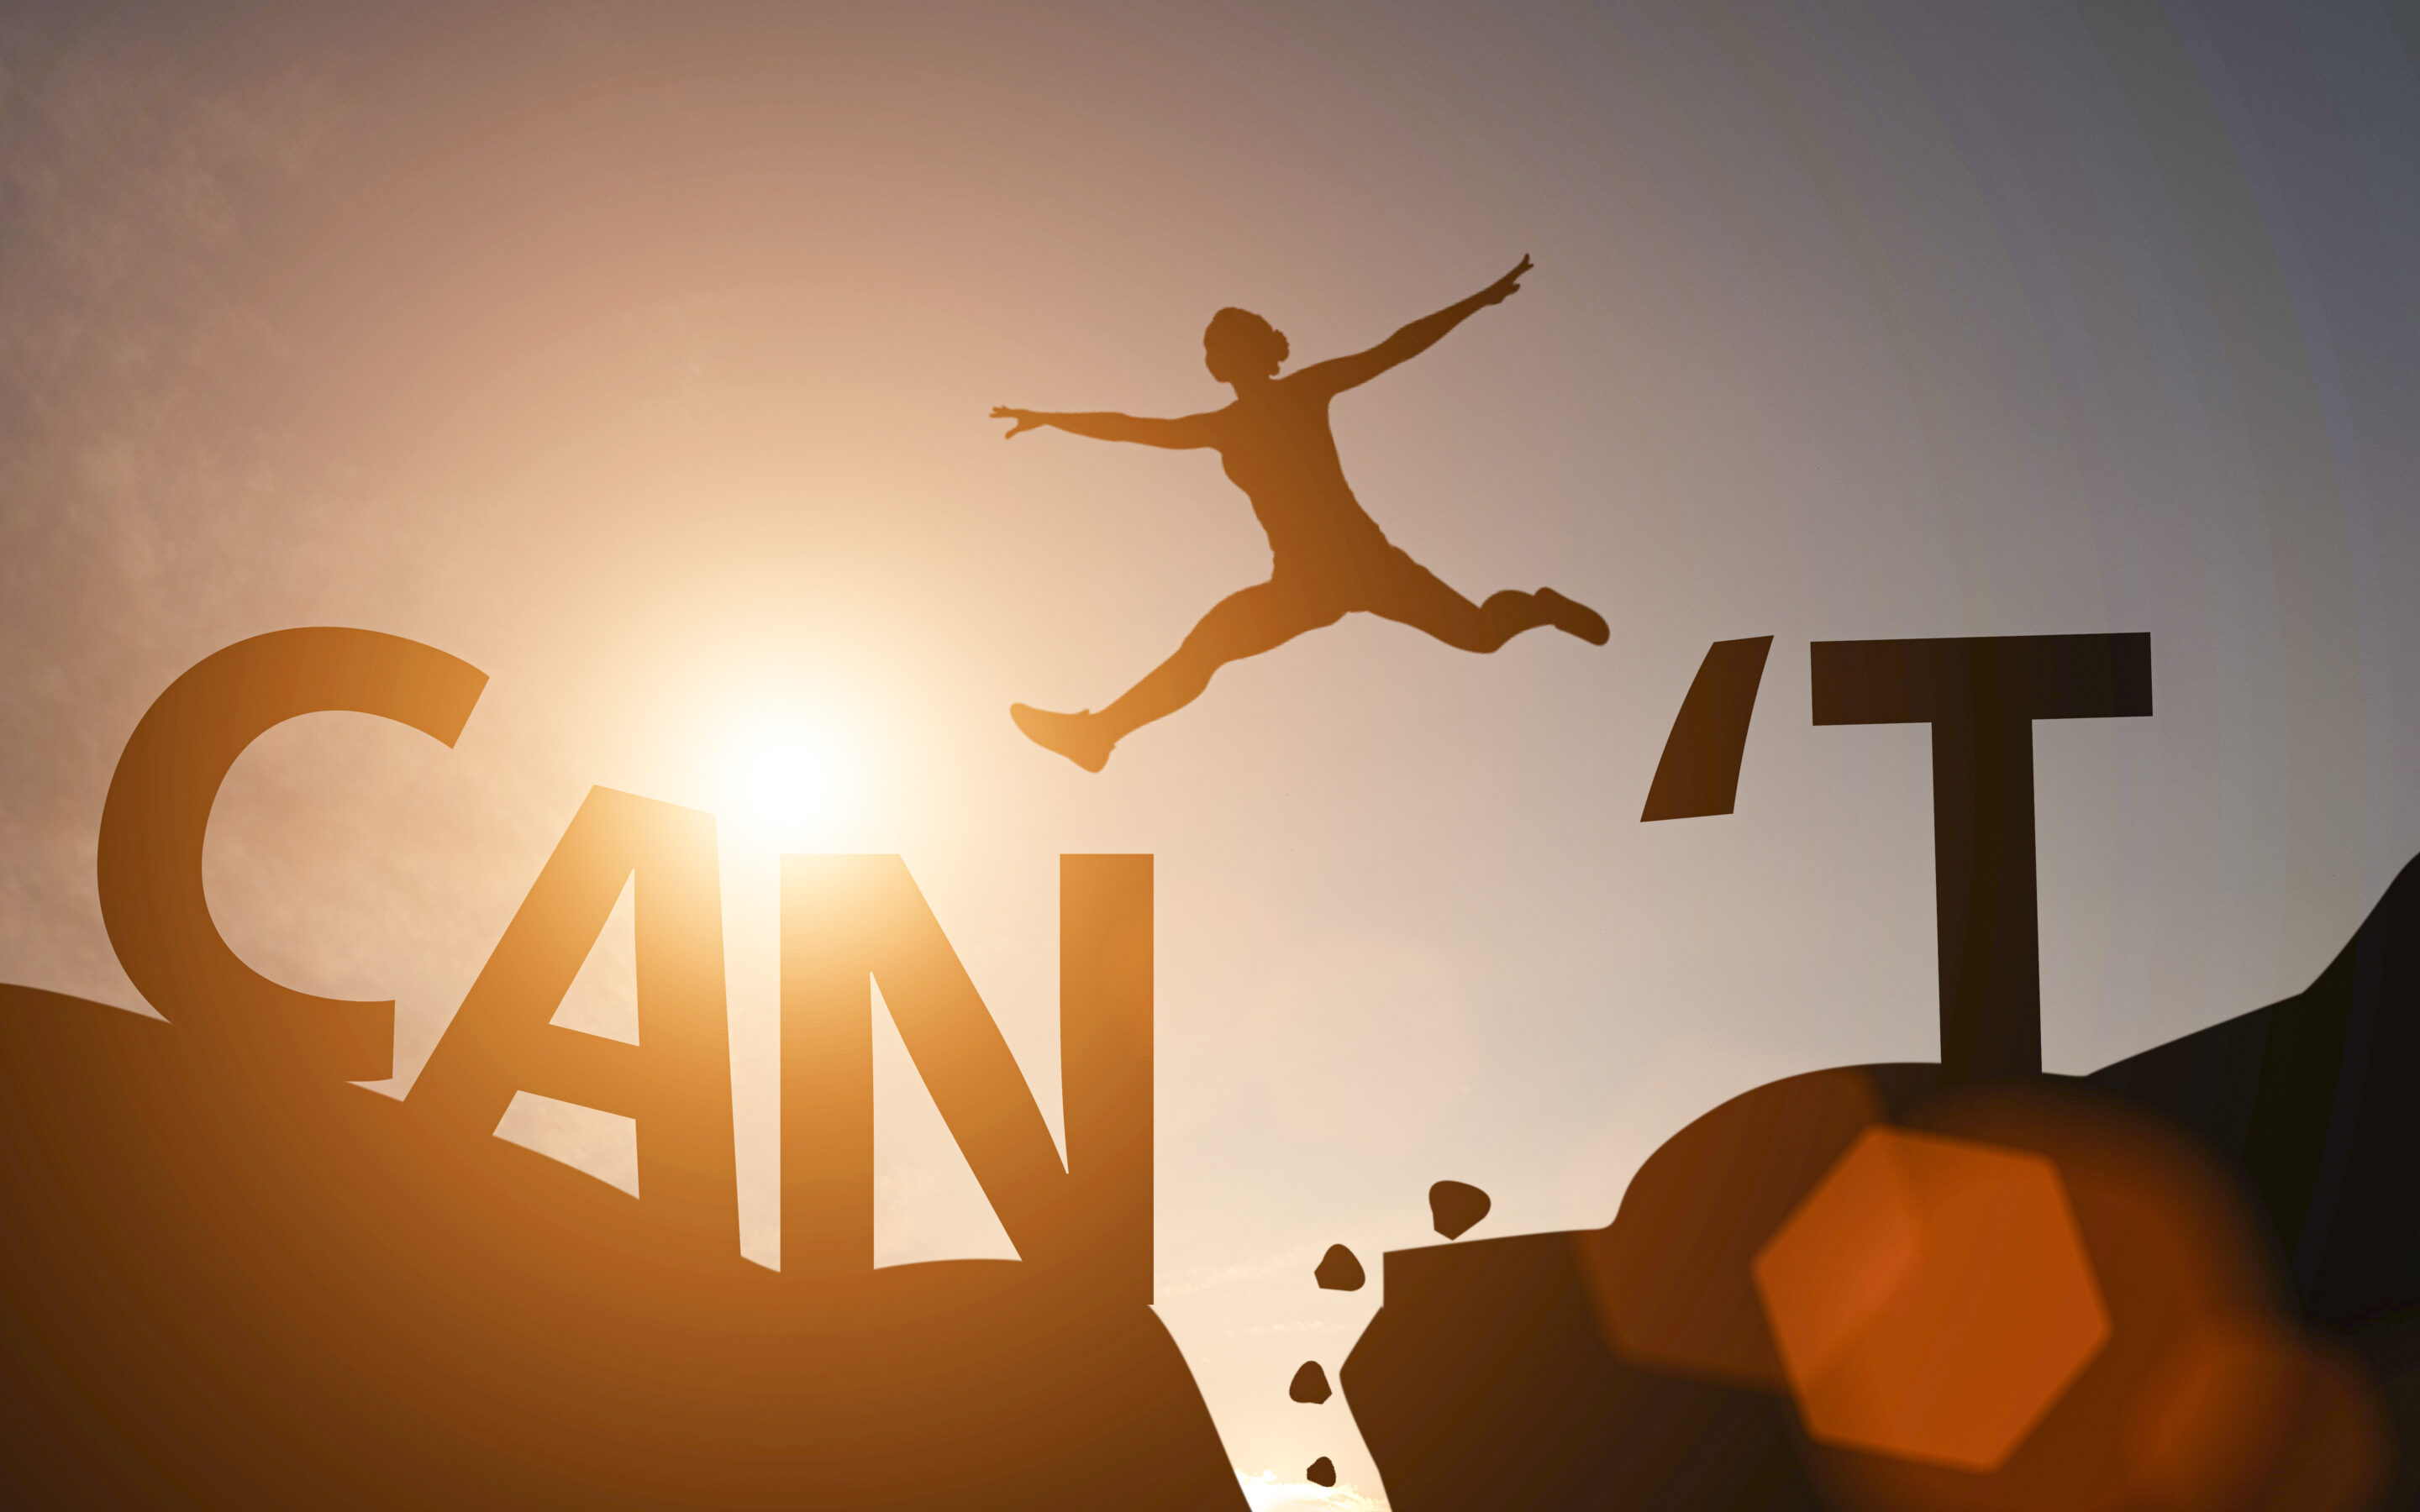 Silhouette of a woman jumping from the word can't to can on a mountain